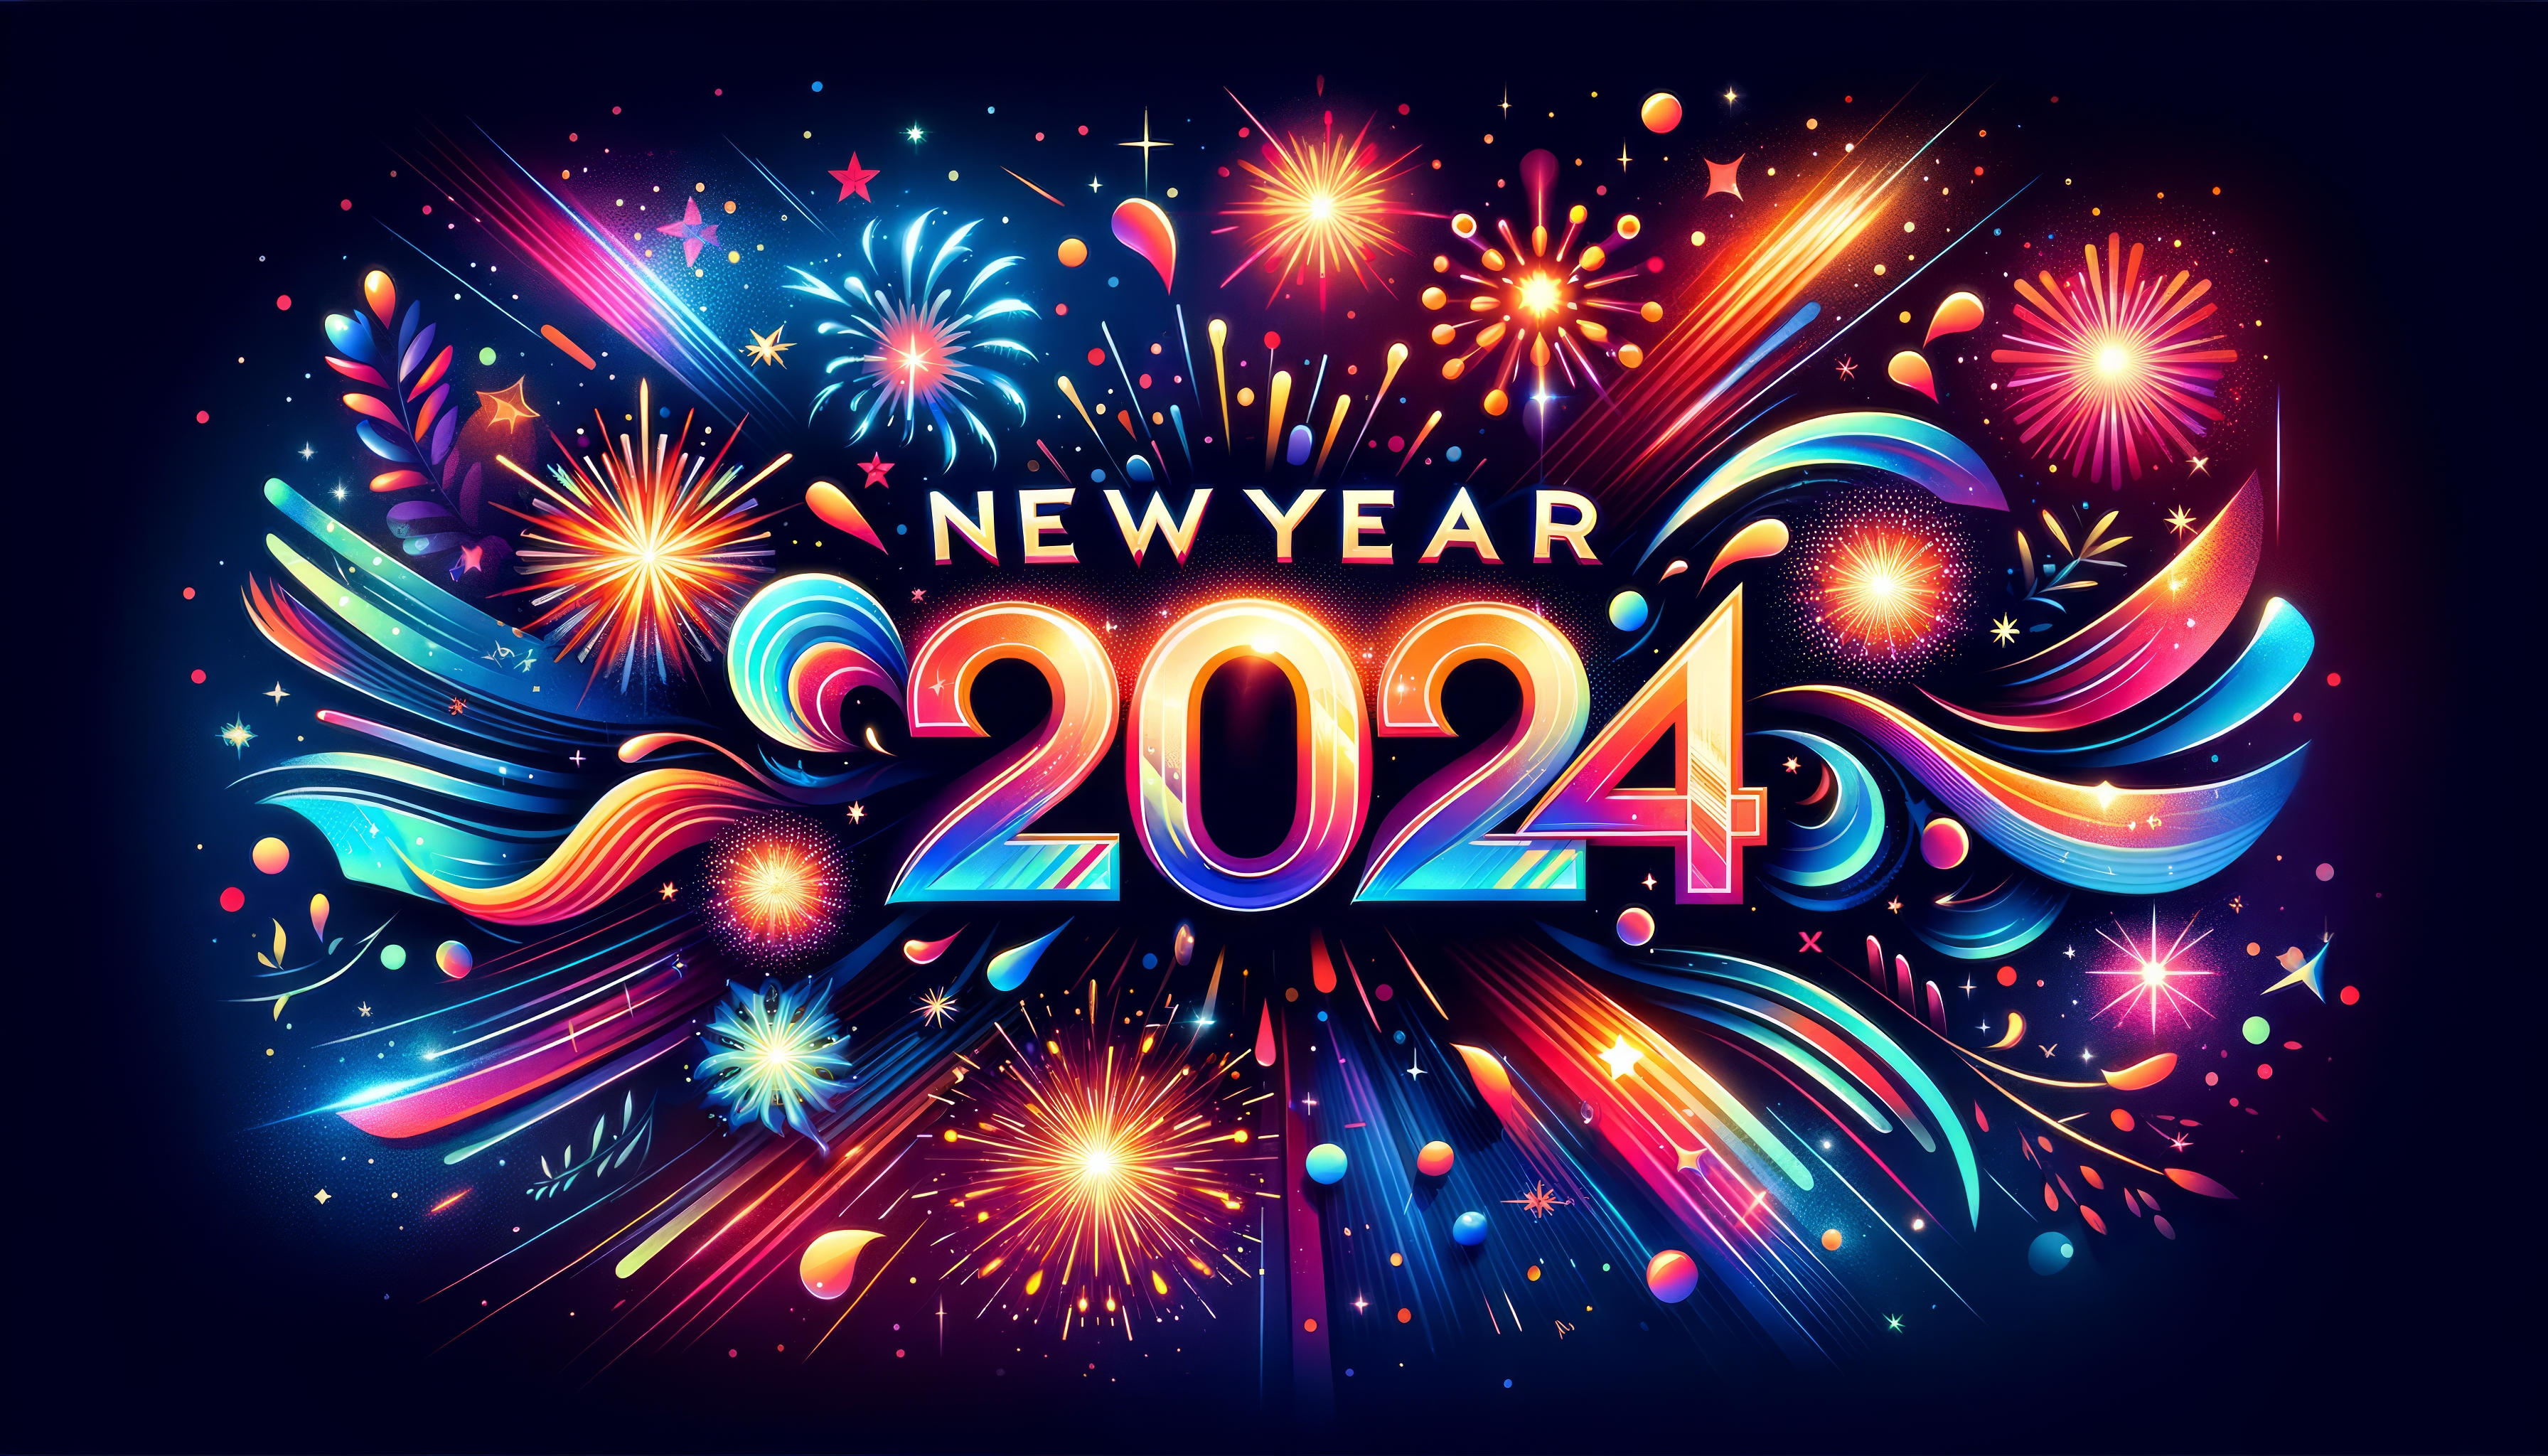 Colorful New Year 2024 HD desktop wallpaper featuring vibrant fireworks and festive graphics.